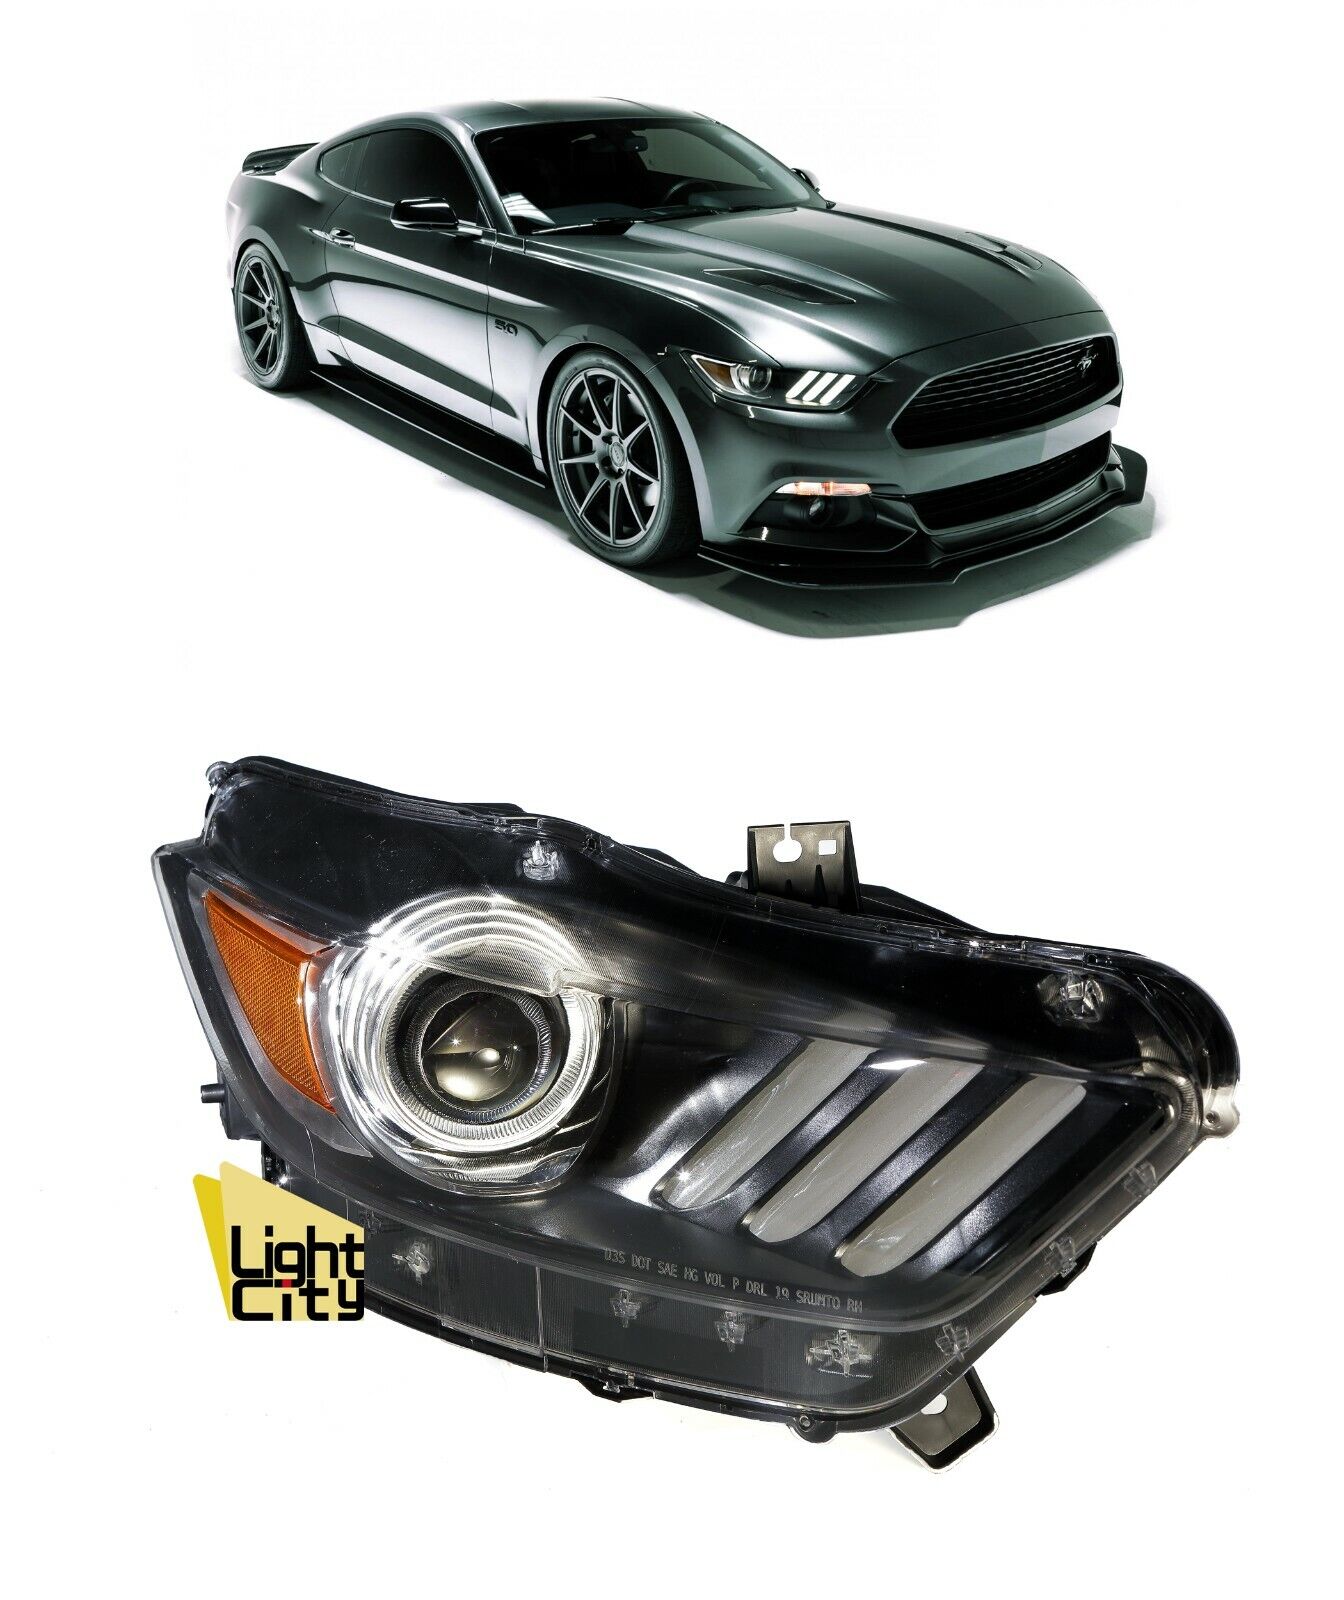 [OE Style] For 2015-2017 Ford Mustang HID/Xenon (LED DRL) Passenger Headlight RH